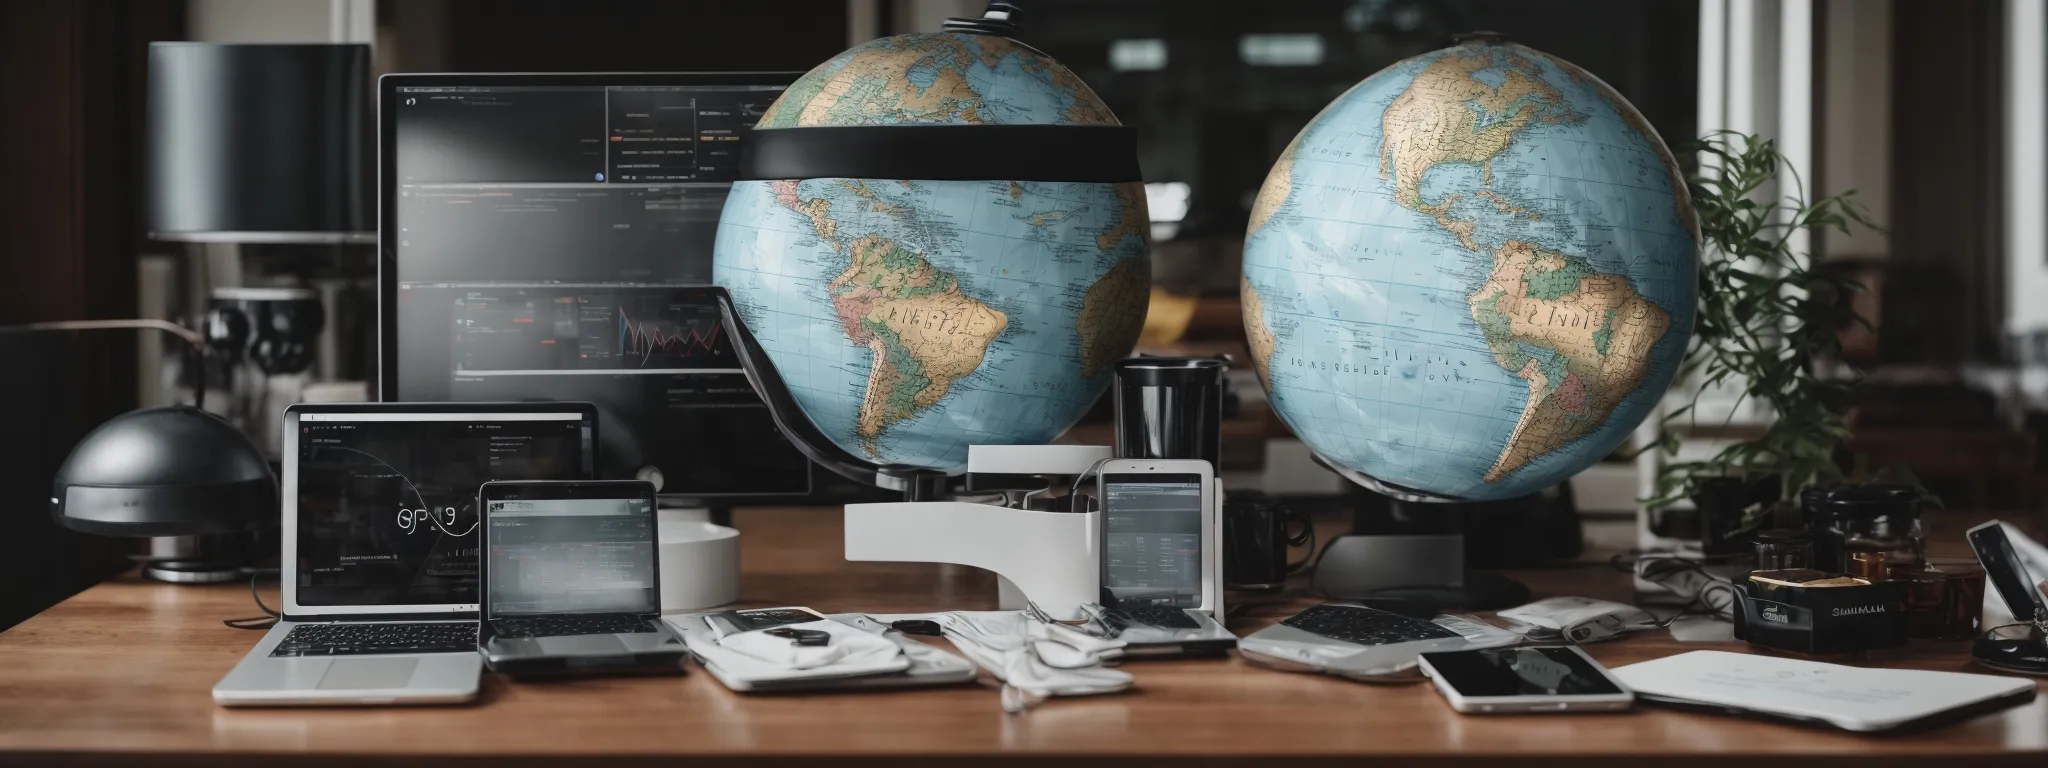 a globe surrounded by multiple digital devices showcasing seo analytics graphs and world languages.